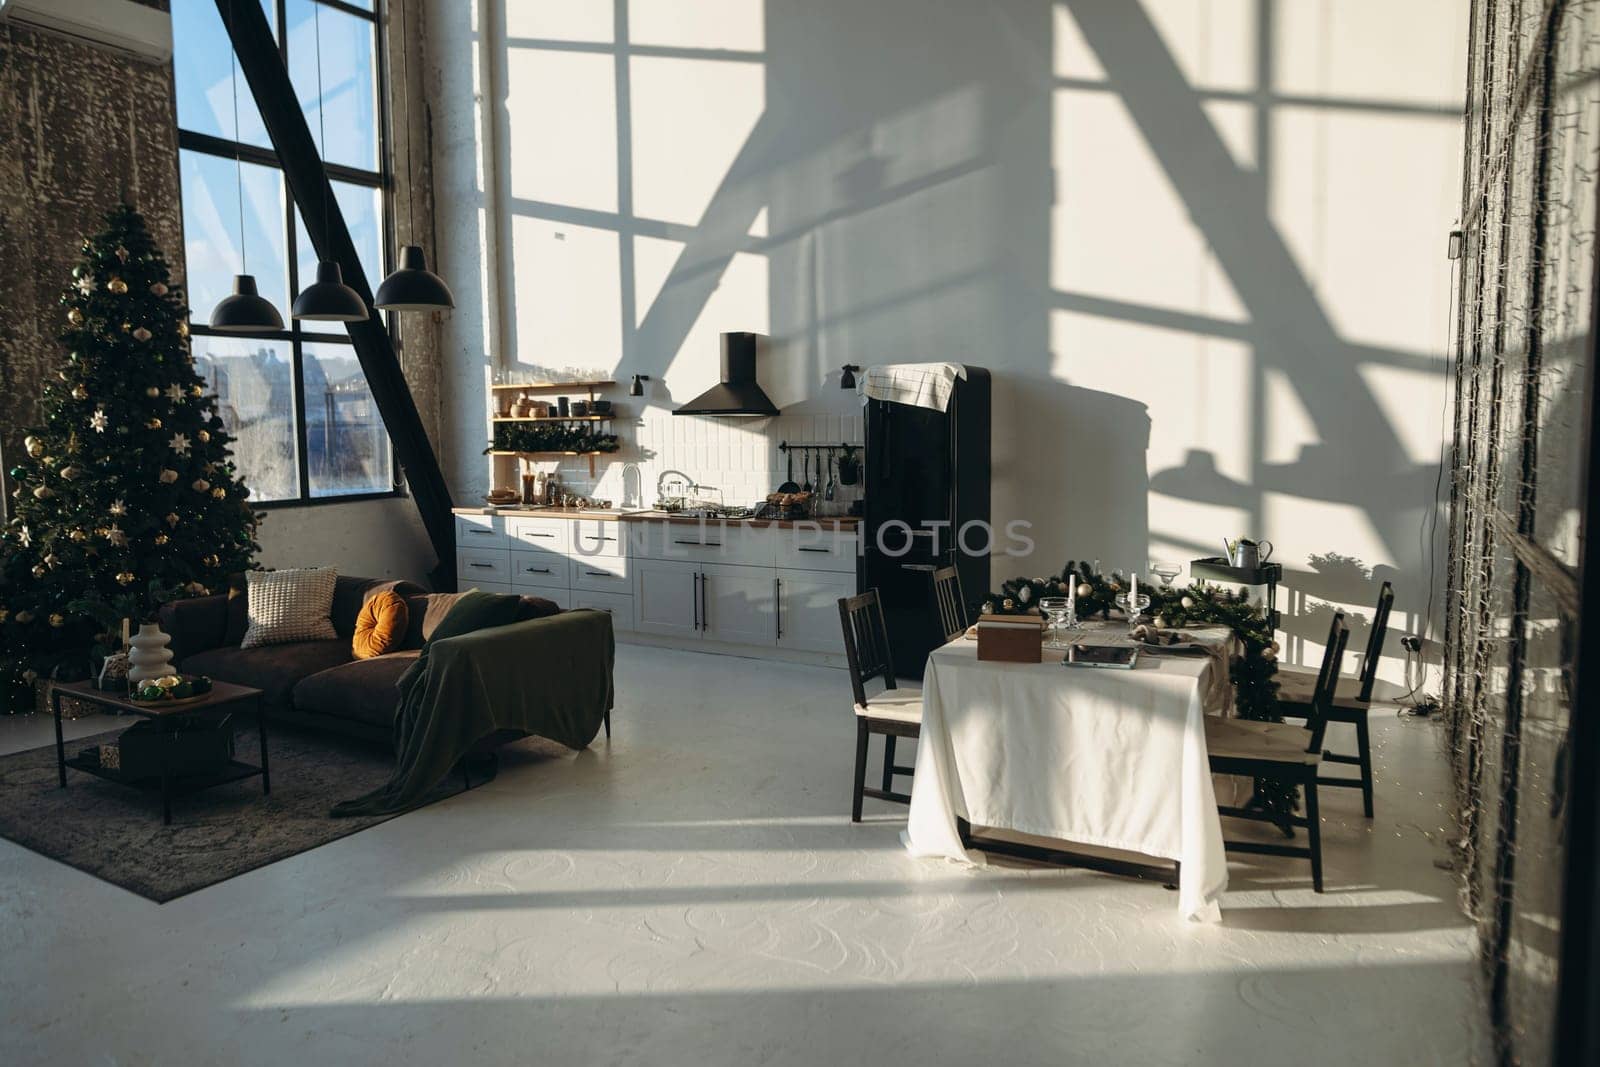 Sunlit winter morning in a Christmas apartment. High quality photo